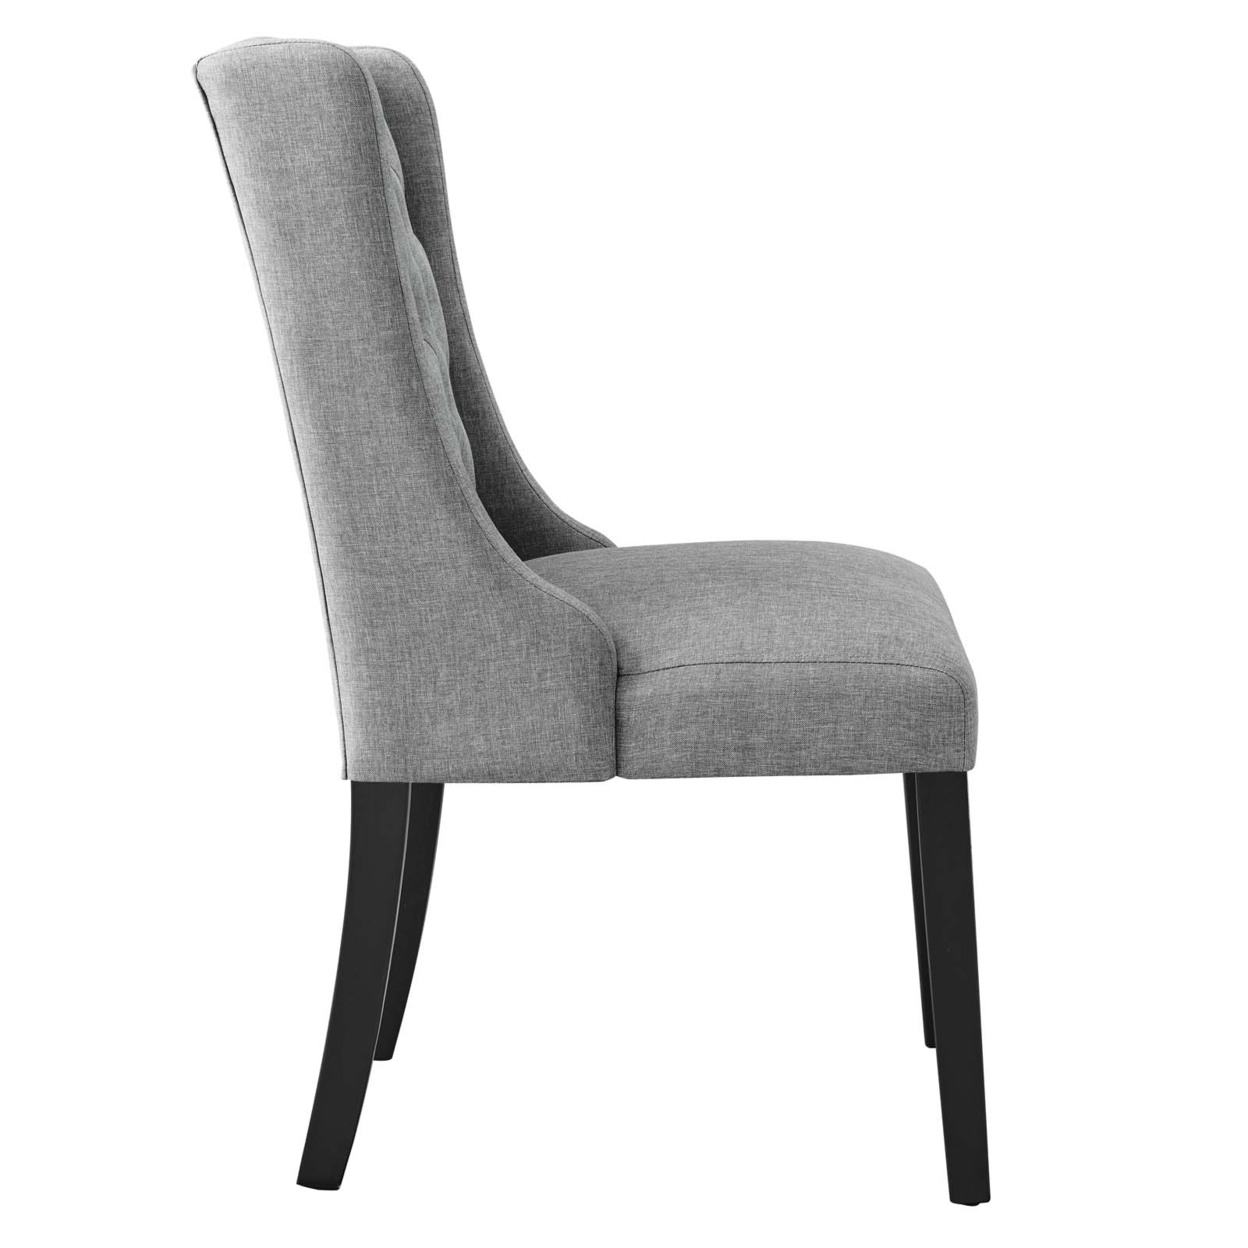 Baronet Button Tufted Fabric Dining Chair, Light Gray